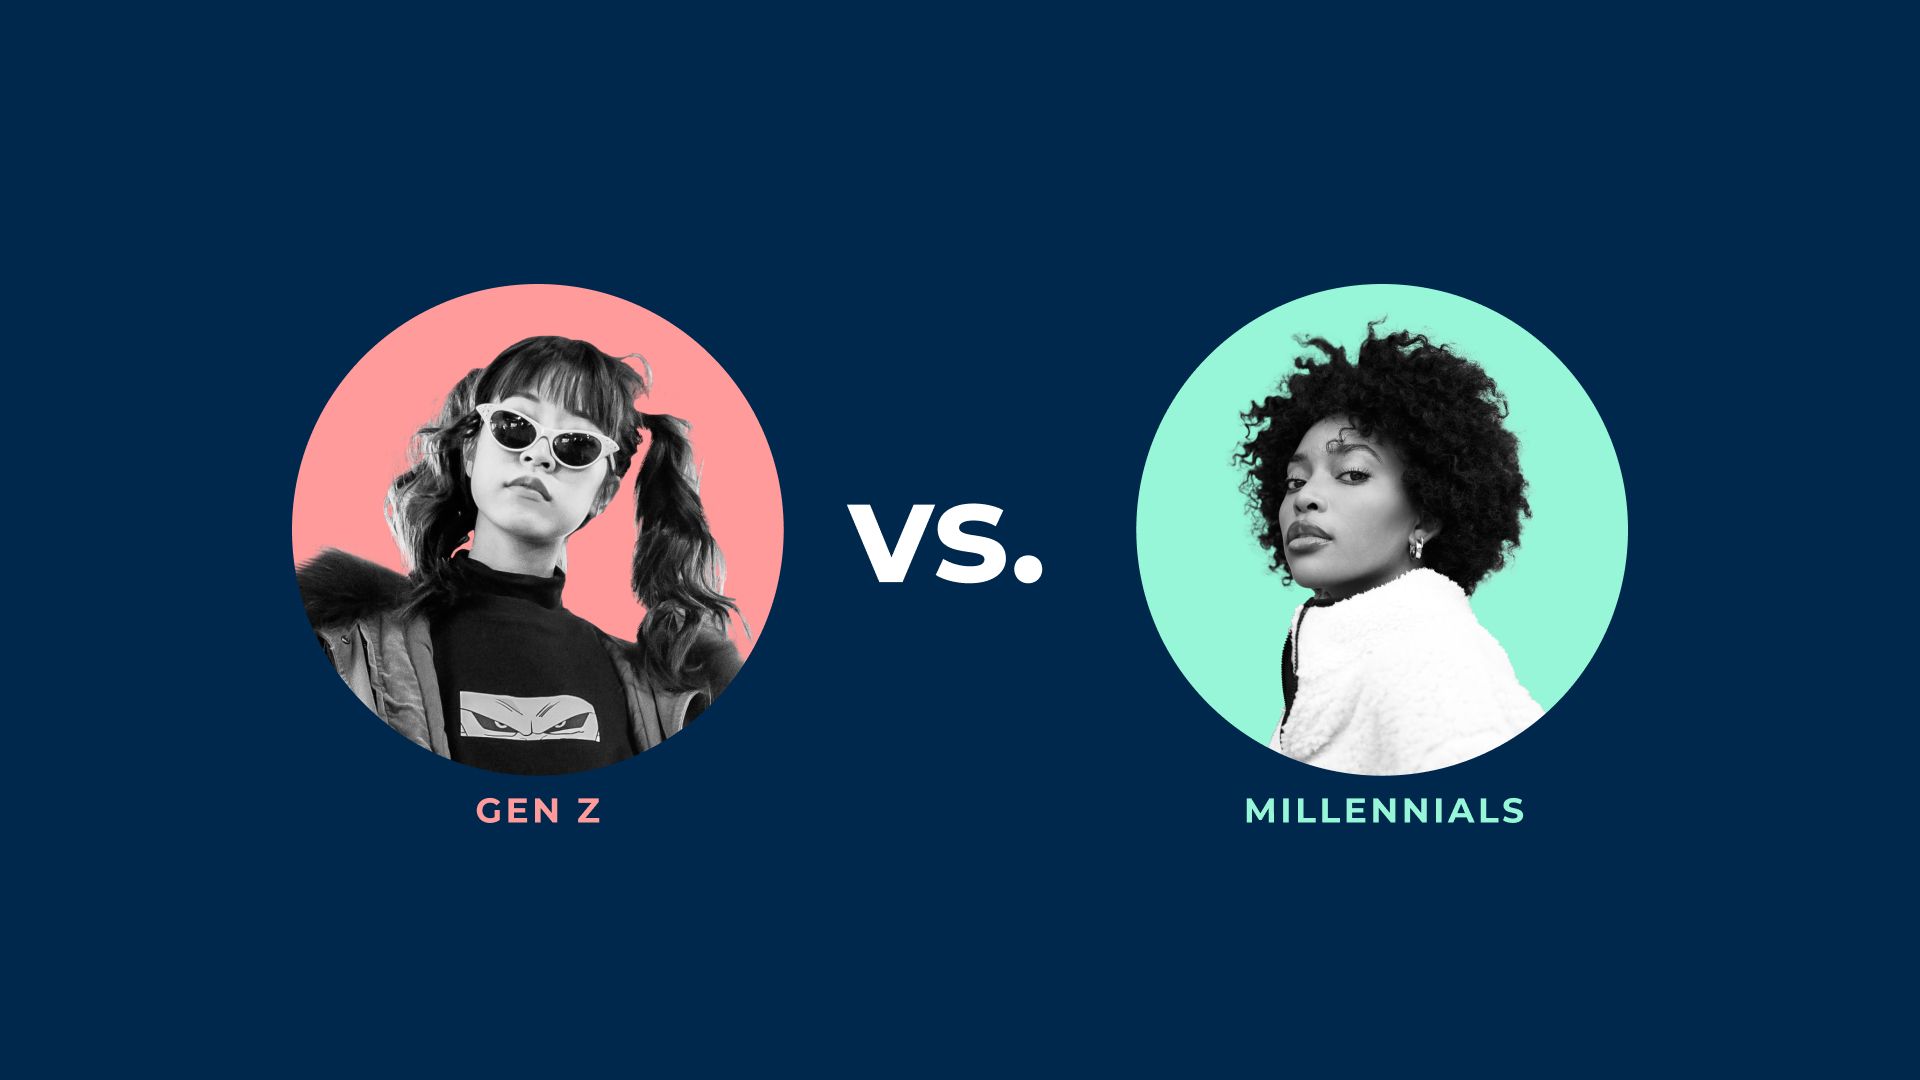 Image of a woman representing Gen Z and image of a women representing millennials against a blue background.